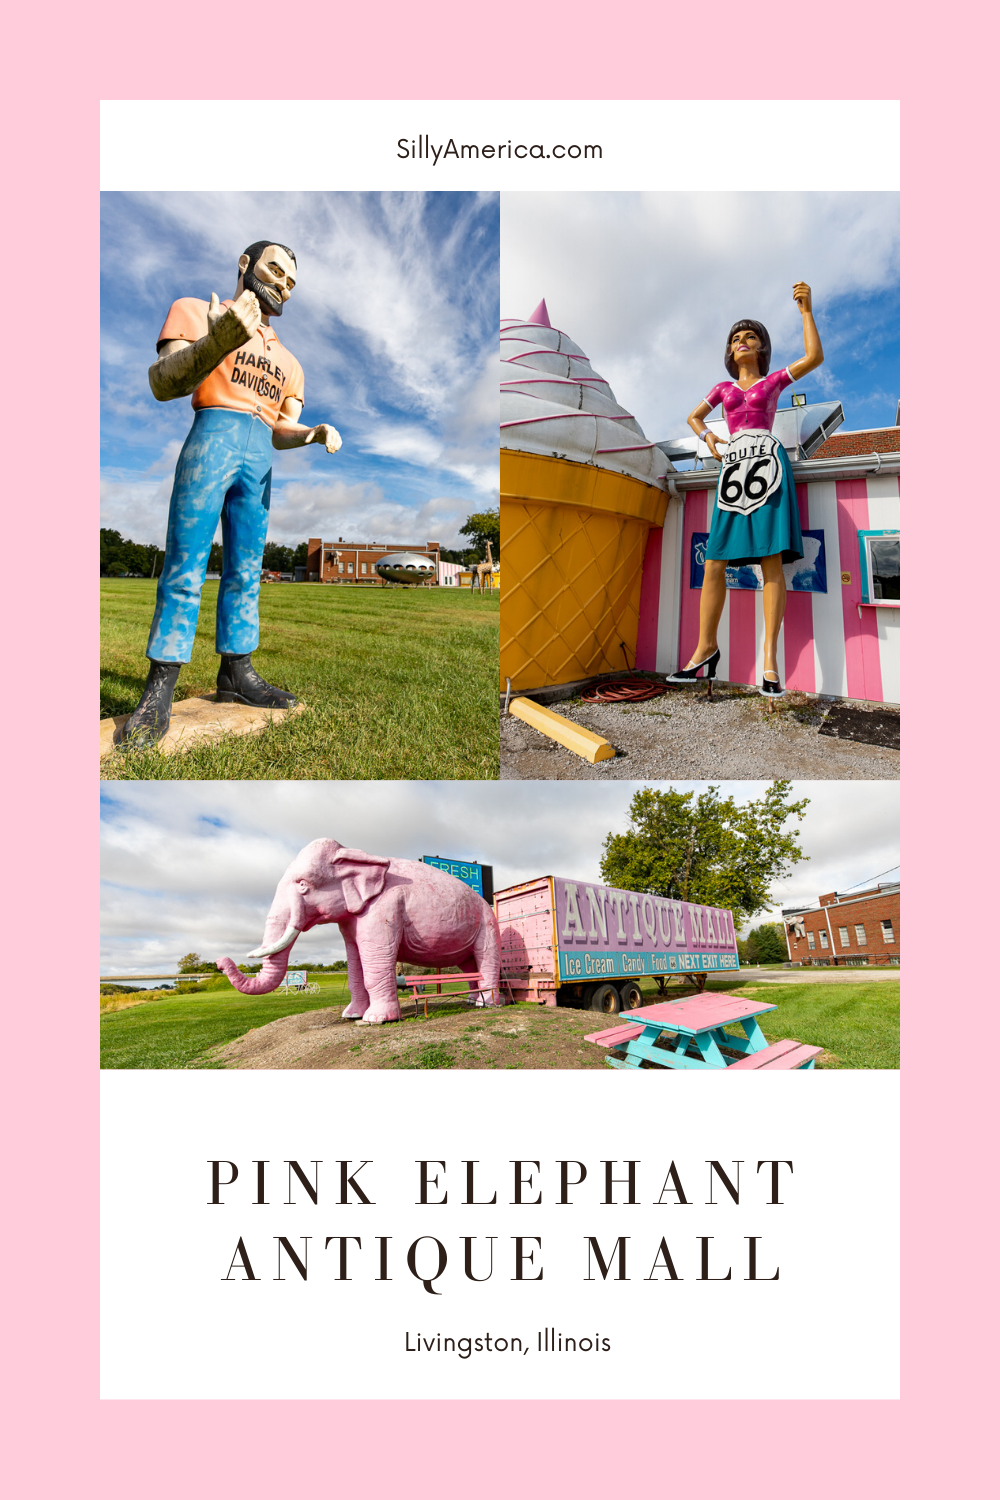 We’ve all heard of pink elephants on parade. But this Route 66 location not only features a giant pink elephant but also a parade of one more giant thing after the next. At the Pink Elephant Antique Mall in Livingston, Illinois you can find their famous big pink elephant and also so much more.  #RoadTrips #RoadTripStop #Route66 #Route66RoadTrip #IllinoisRoute66 #Illinois #IllinoisRoadTrip #IllinoisRoadsideAttractions #RoadsideAttractions #RoadsideAttraction #RoadsideAmerica #RoadTrip